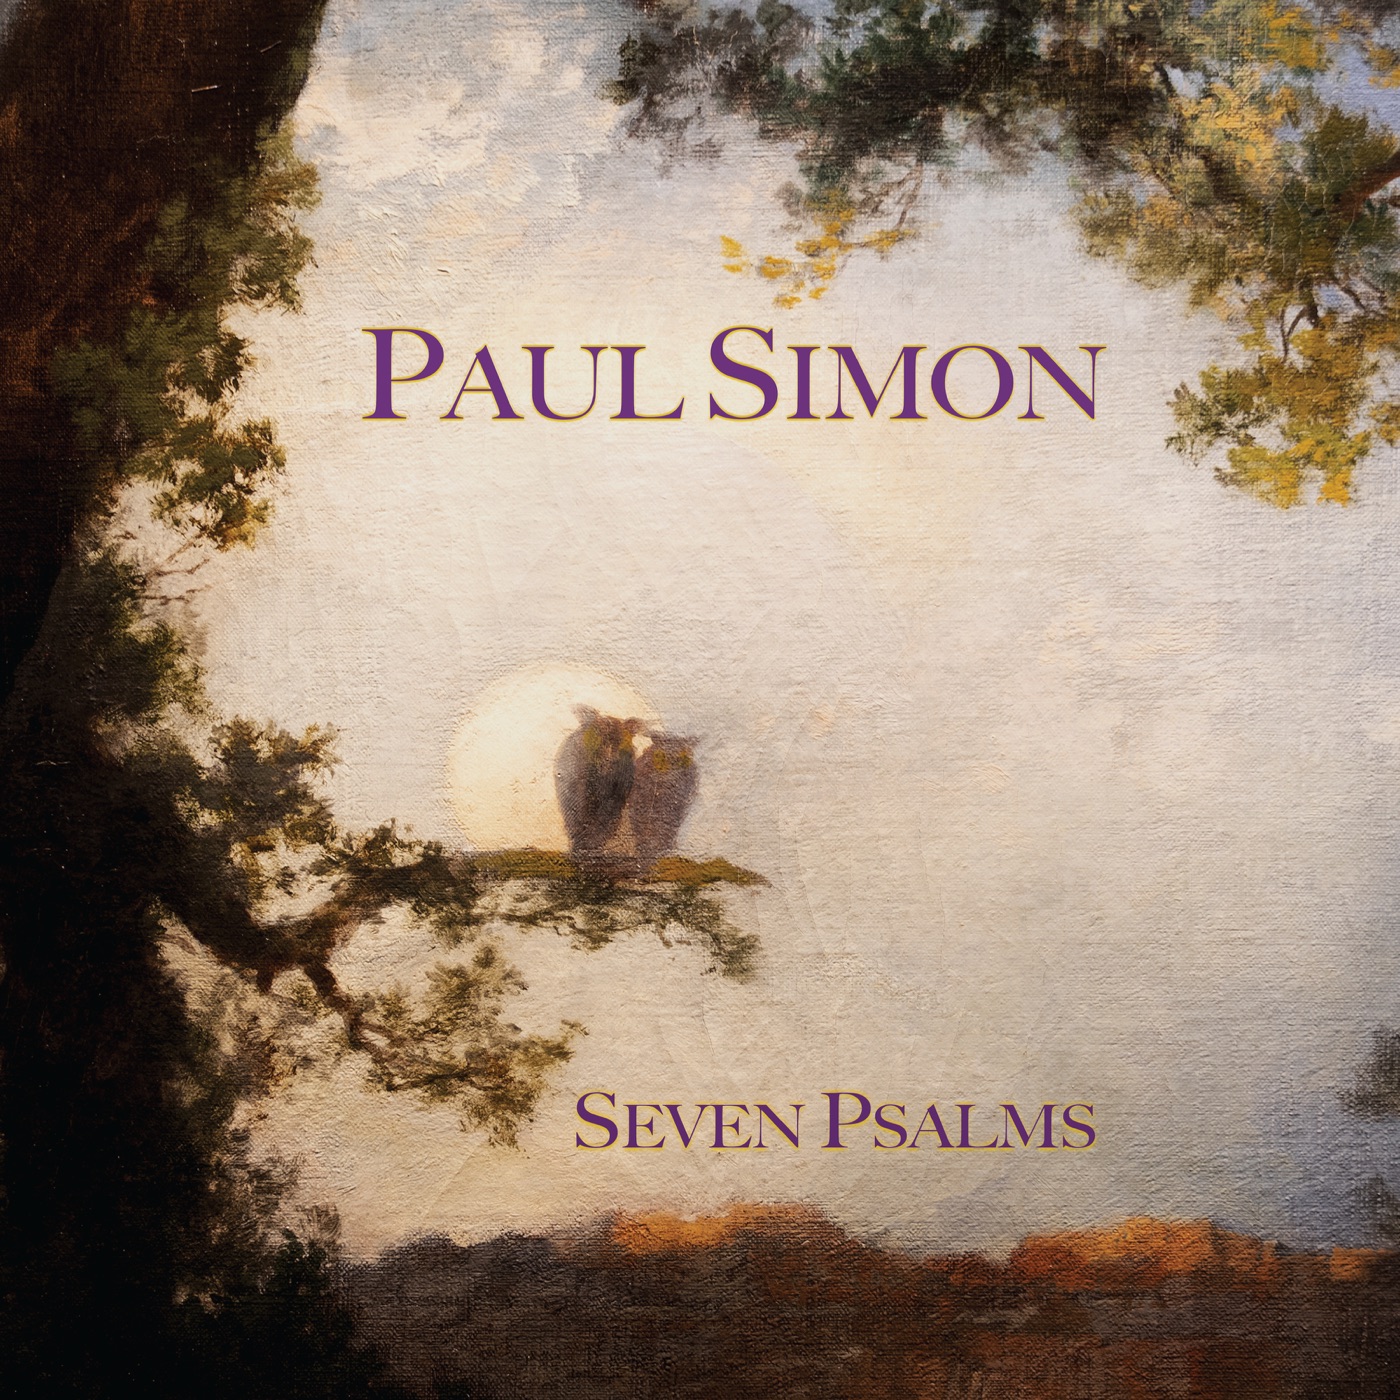 Seven Psalms: The Lord / Love Is Like a Braid / My Professional Opinion / Your Forgiveness / Trail of Volcanoes / The Sacred Harp / Wait by Paul Simon